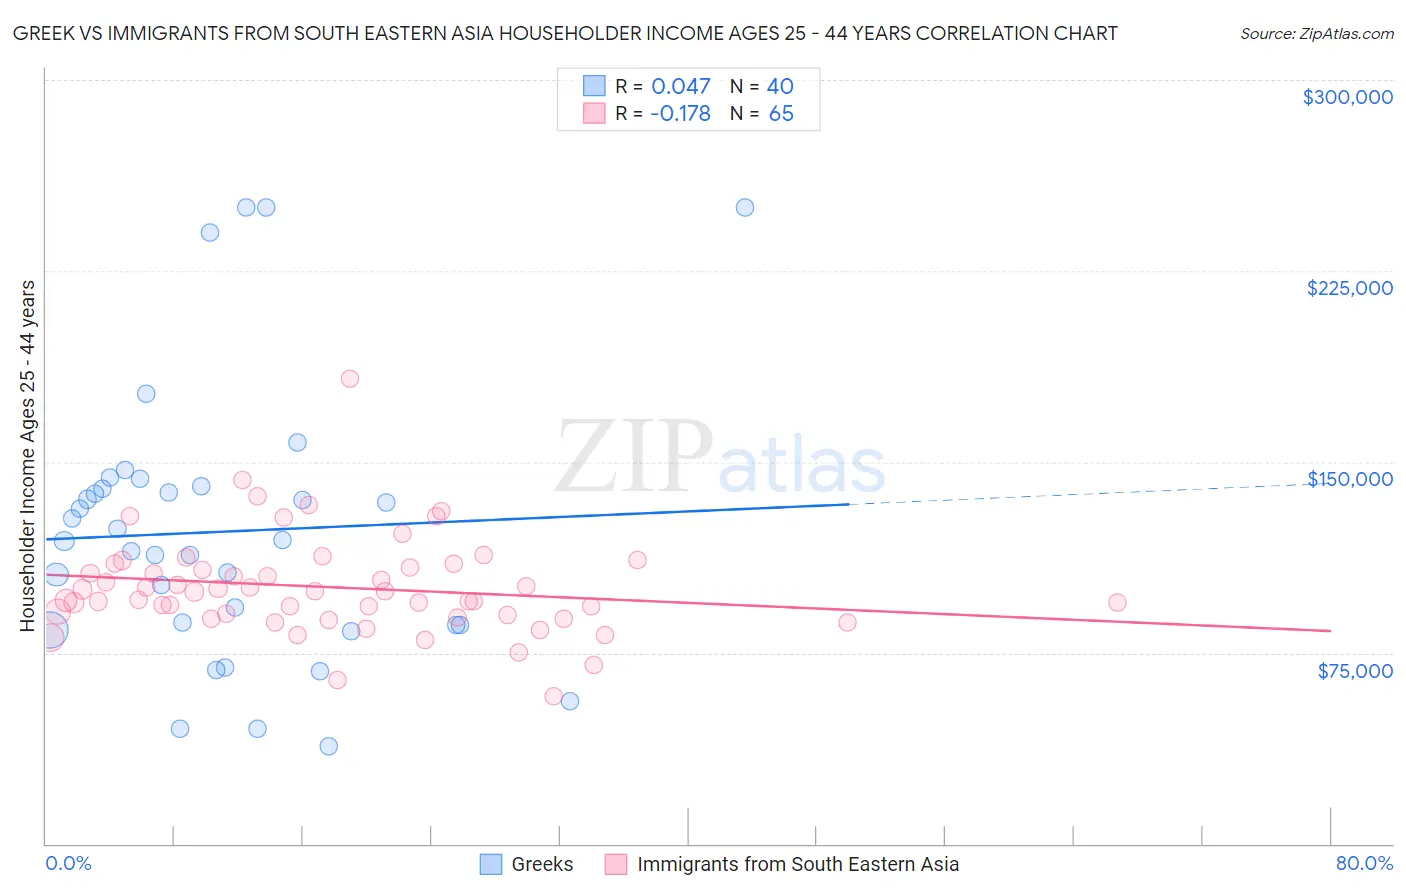 Greek vs Immigrants from South Eastern Asia Householder Income Ages 25 - 44 years